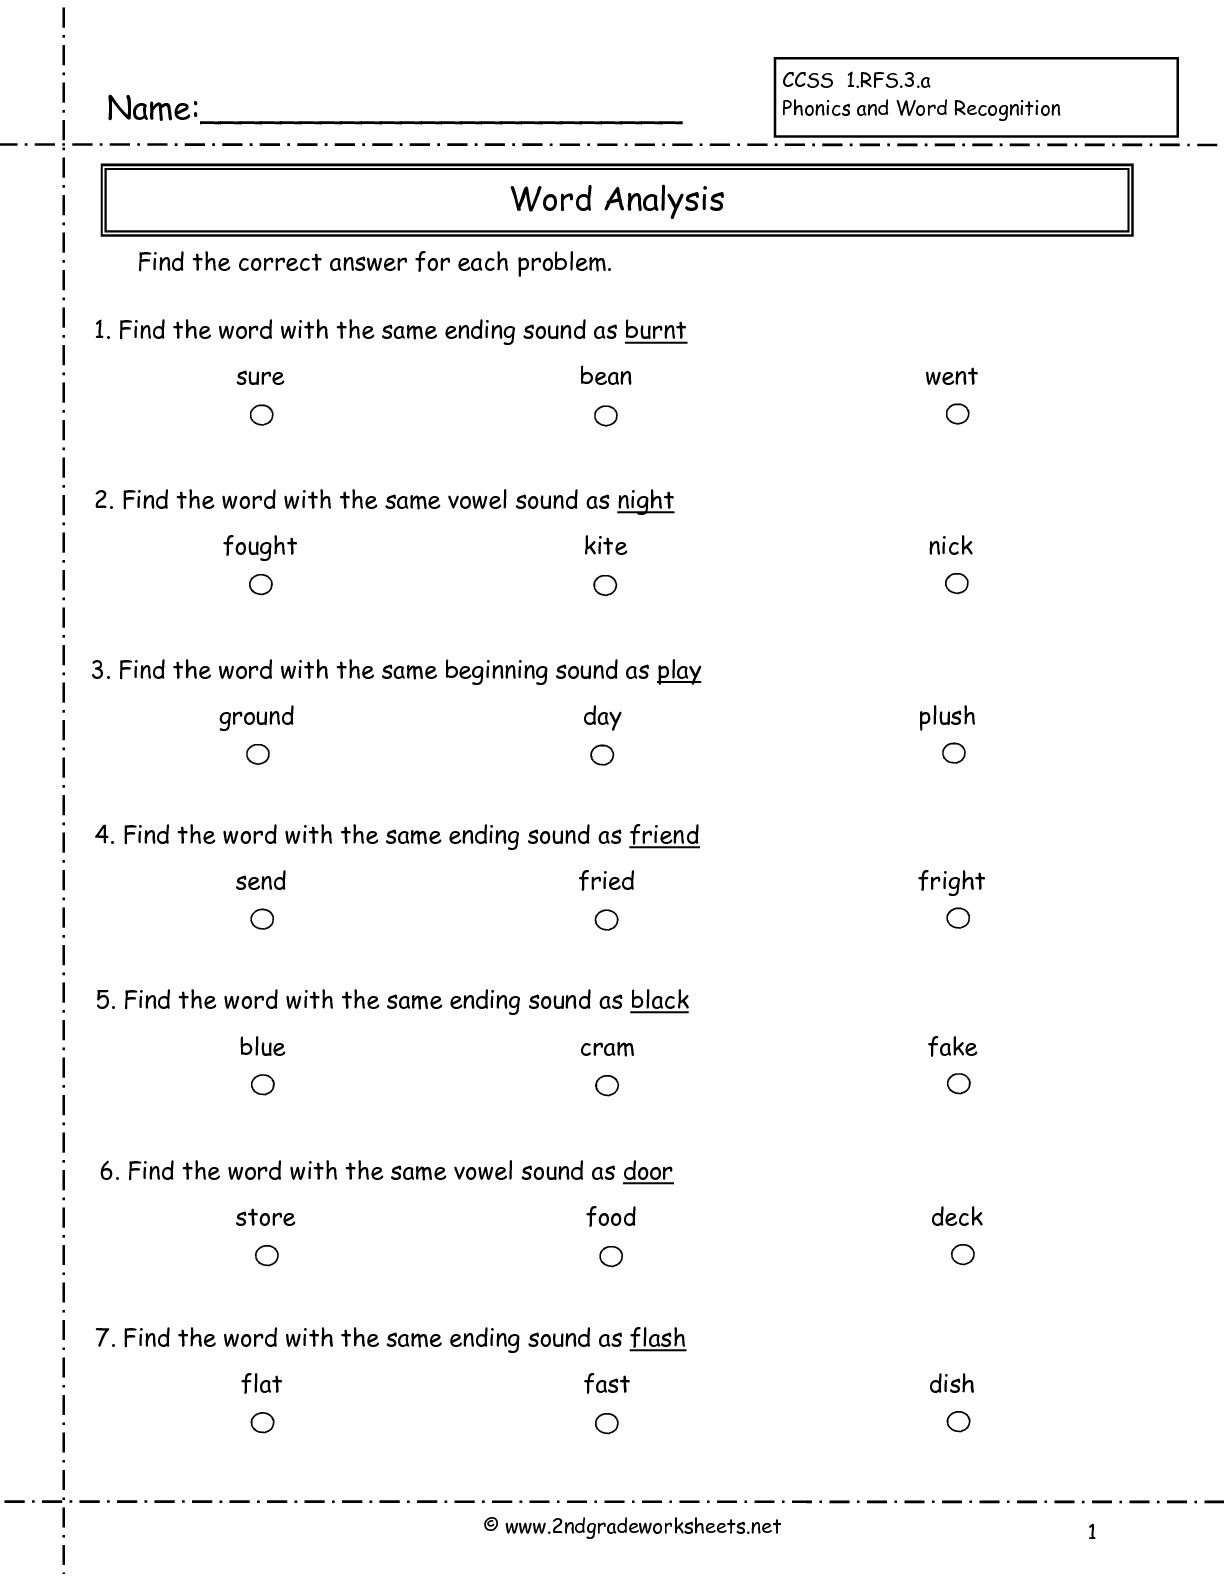 3Rd Grade Phonics Worksheets To Download Free - Math Worksheet For Kids - Free Printable Phonics Worksheets For 4Th Grade